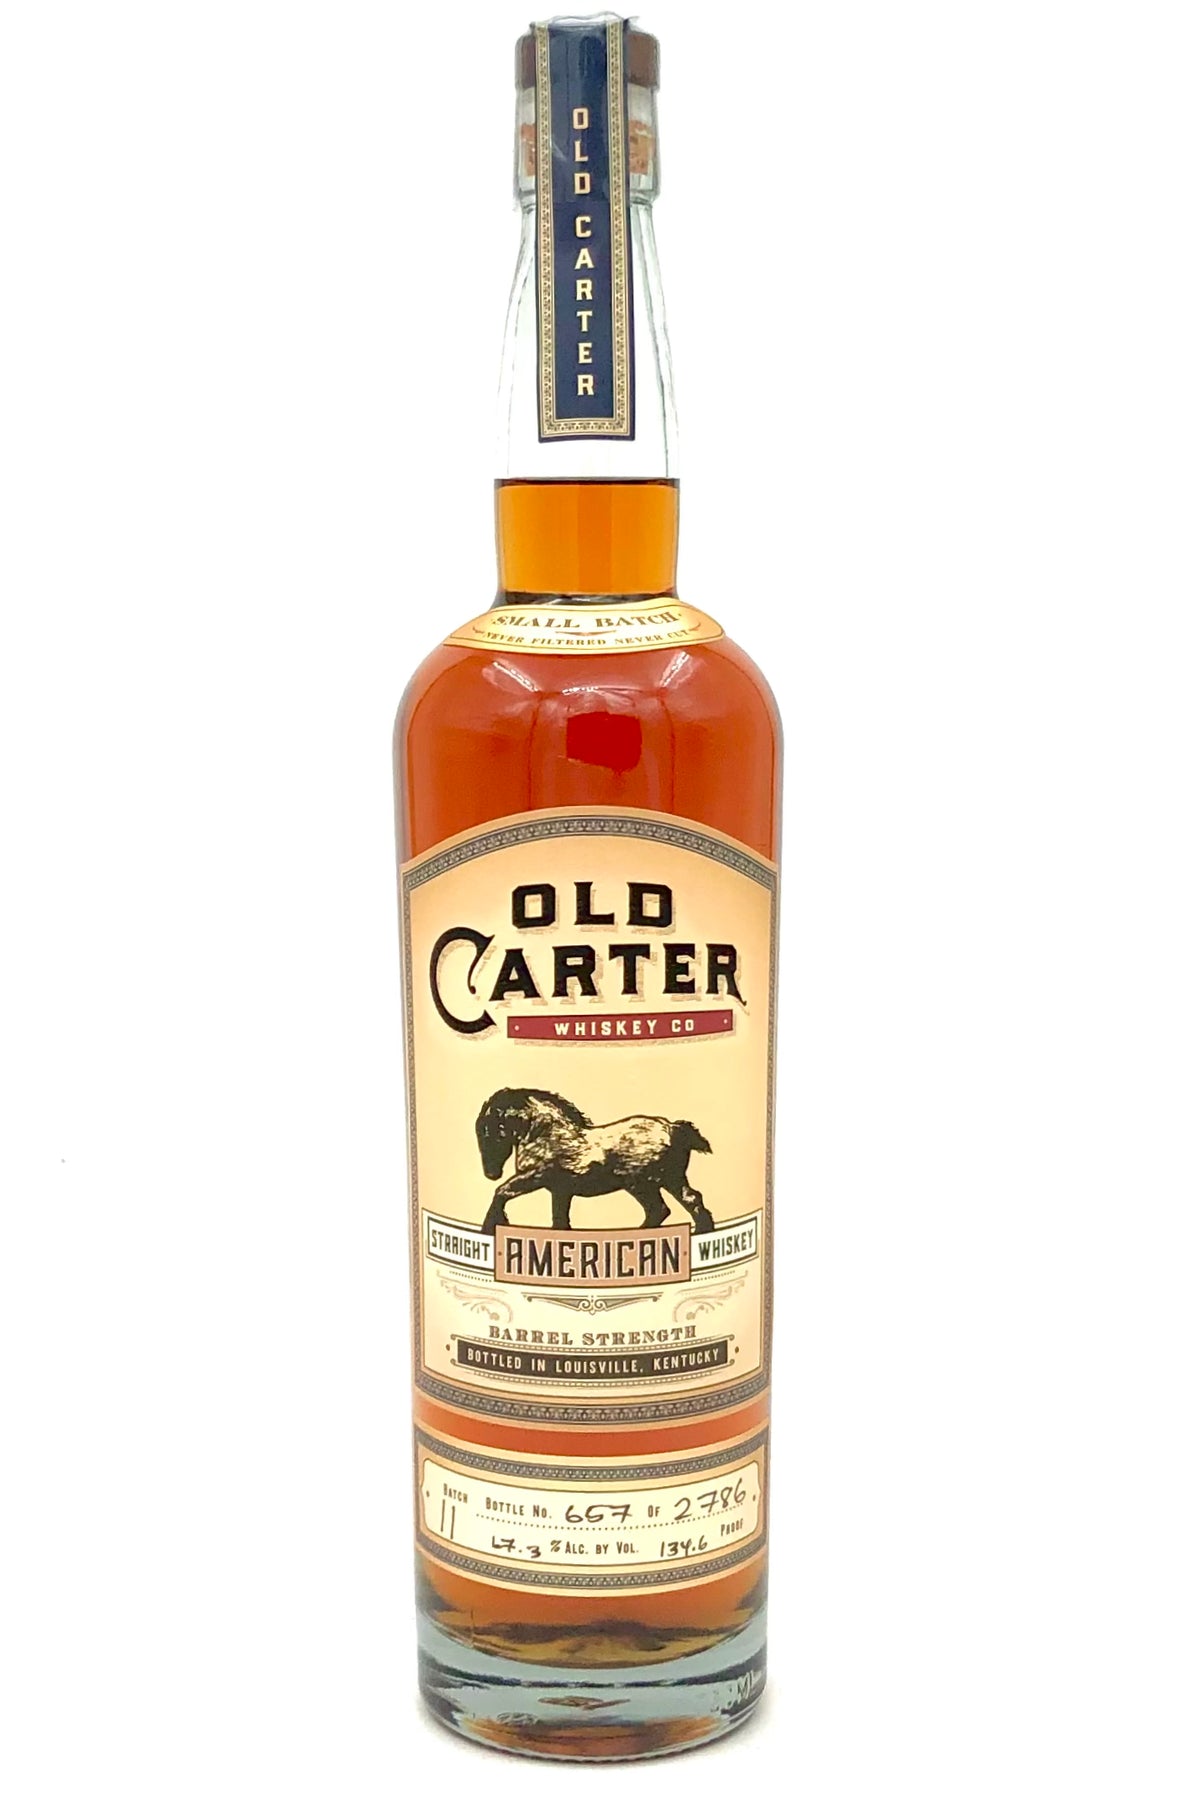 Old Carter #11 Small Batch American Whiskey